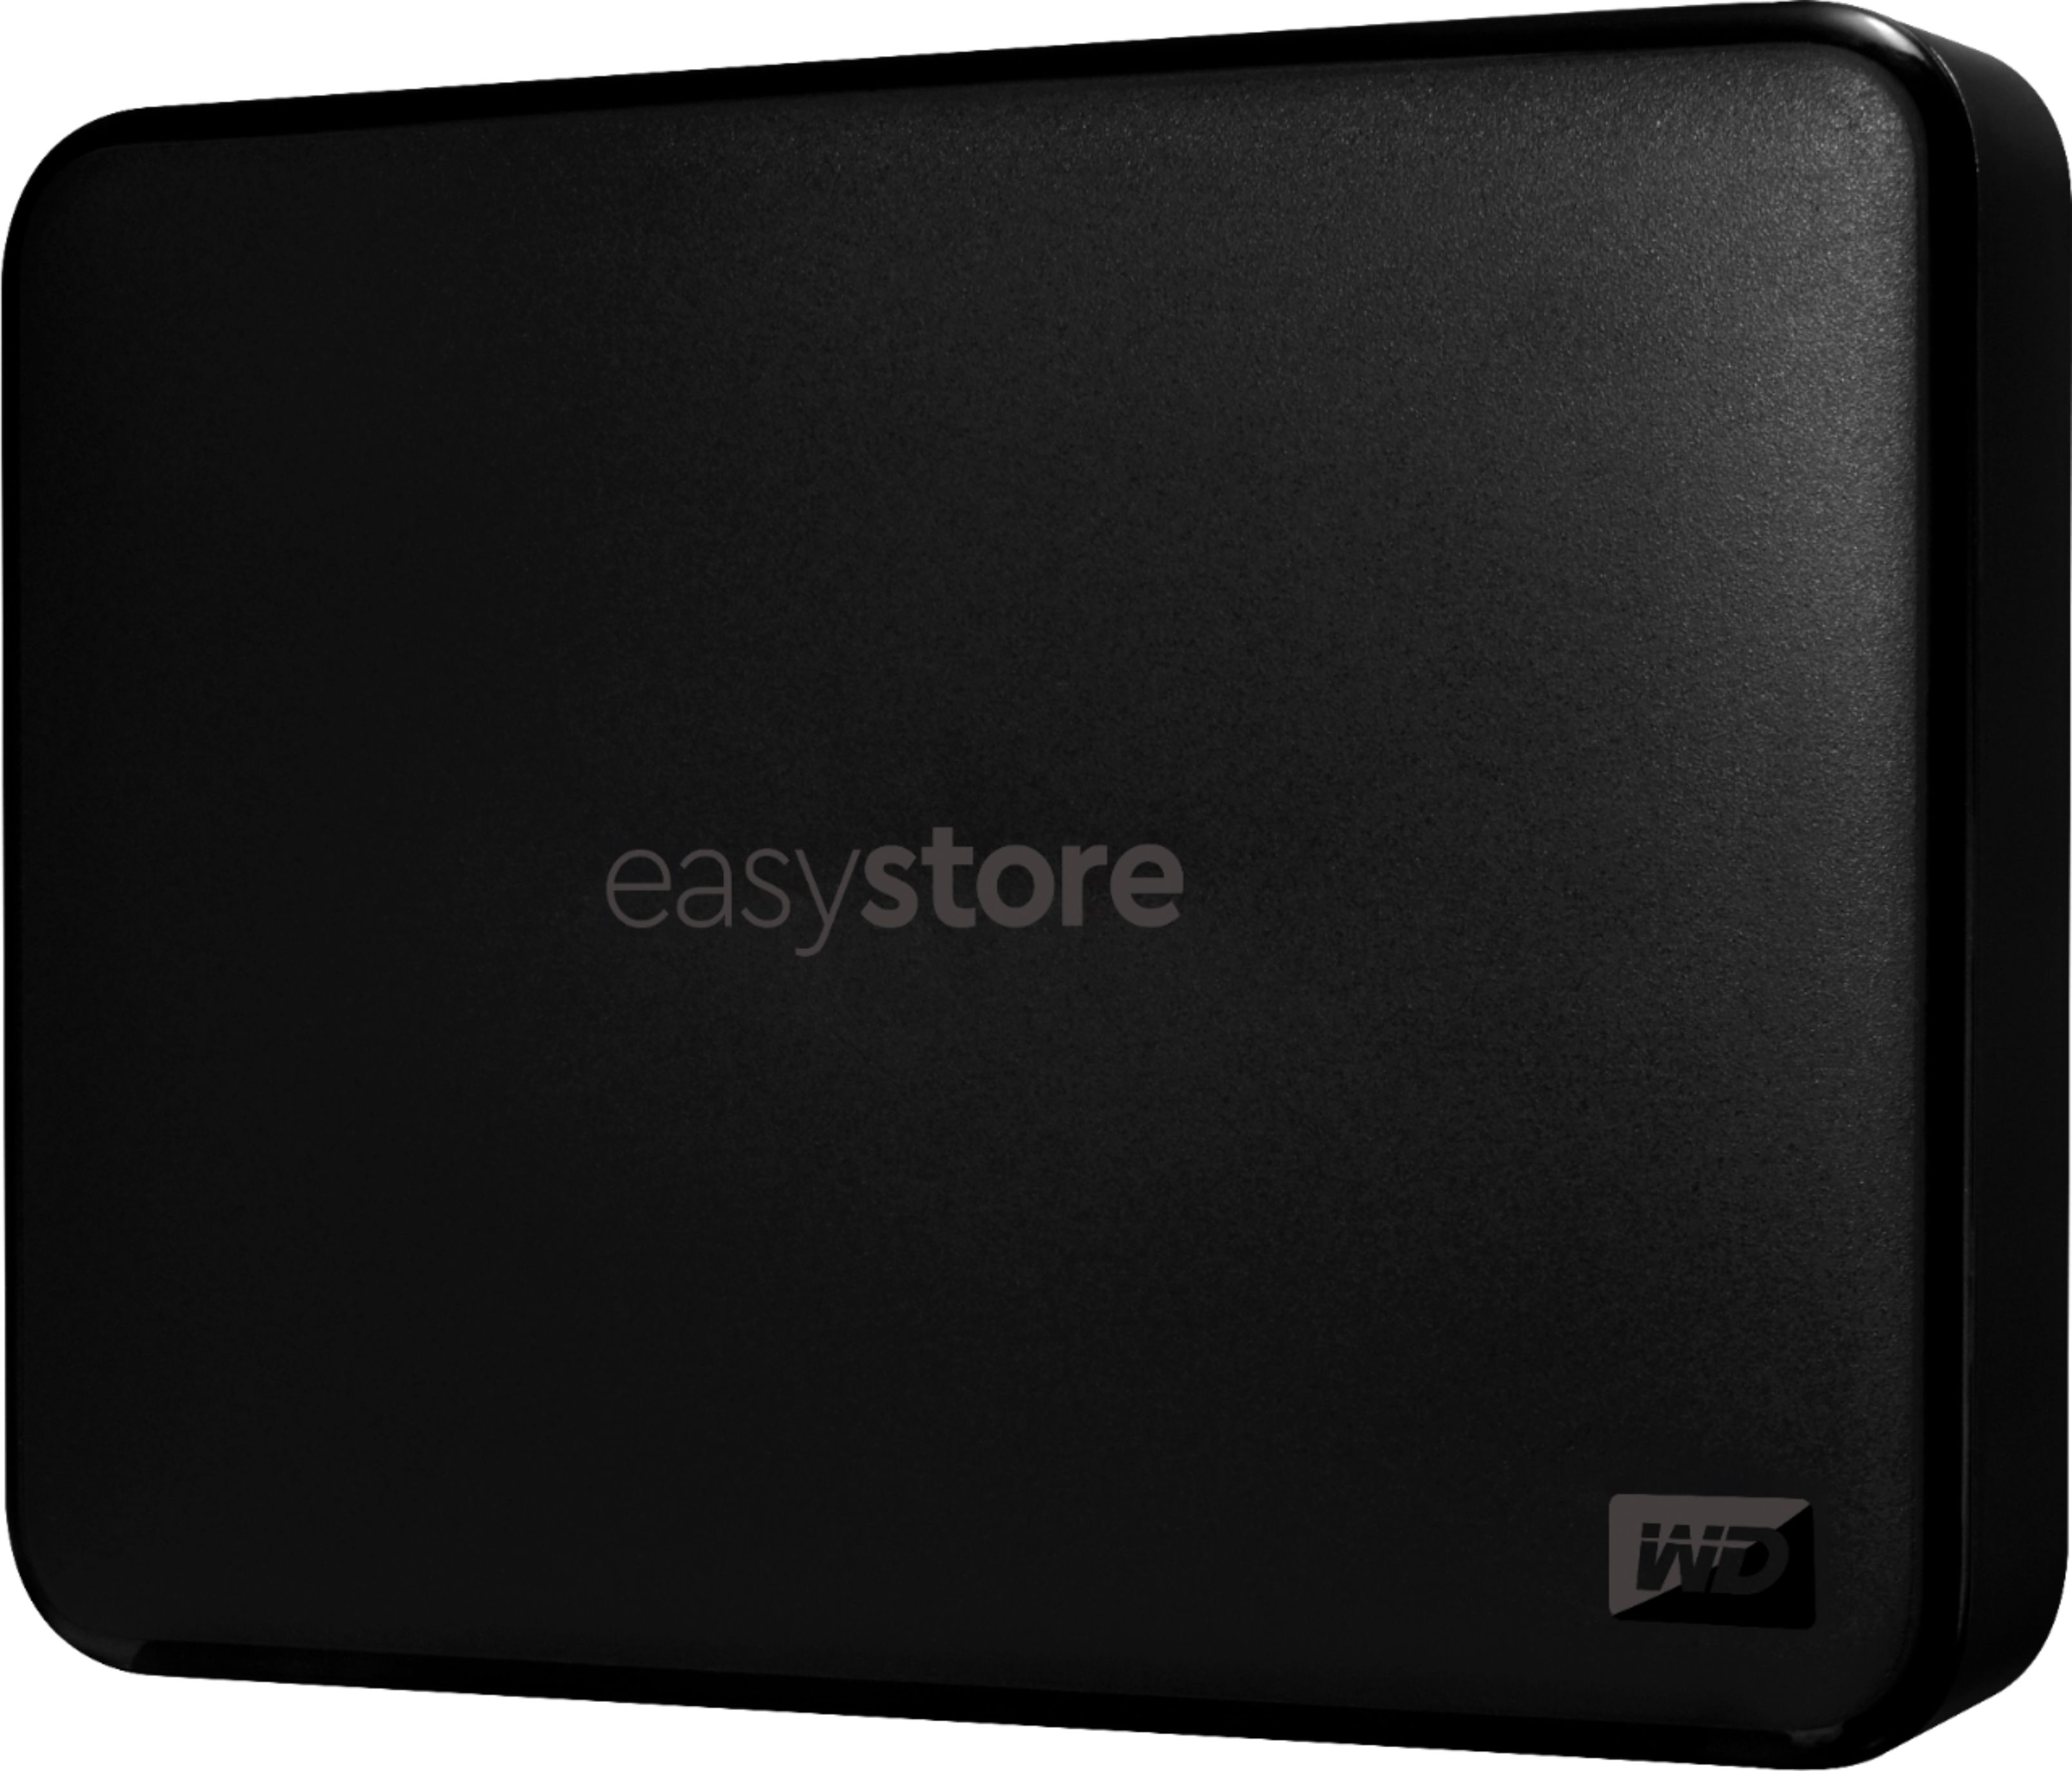 Should I Use Wd Easystore Discovery Software With Macos